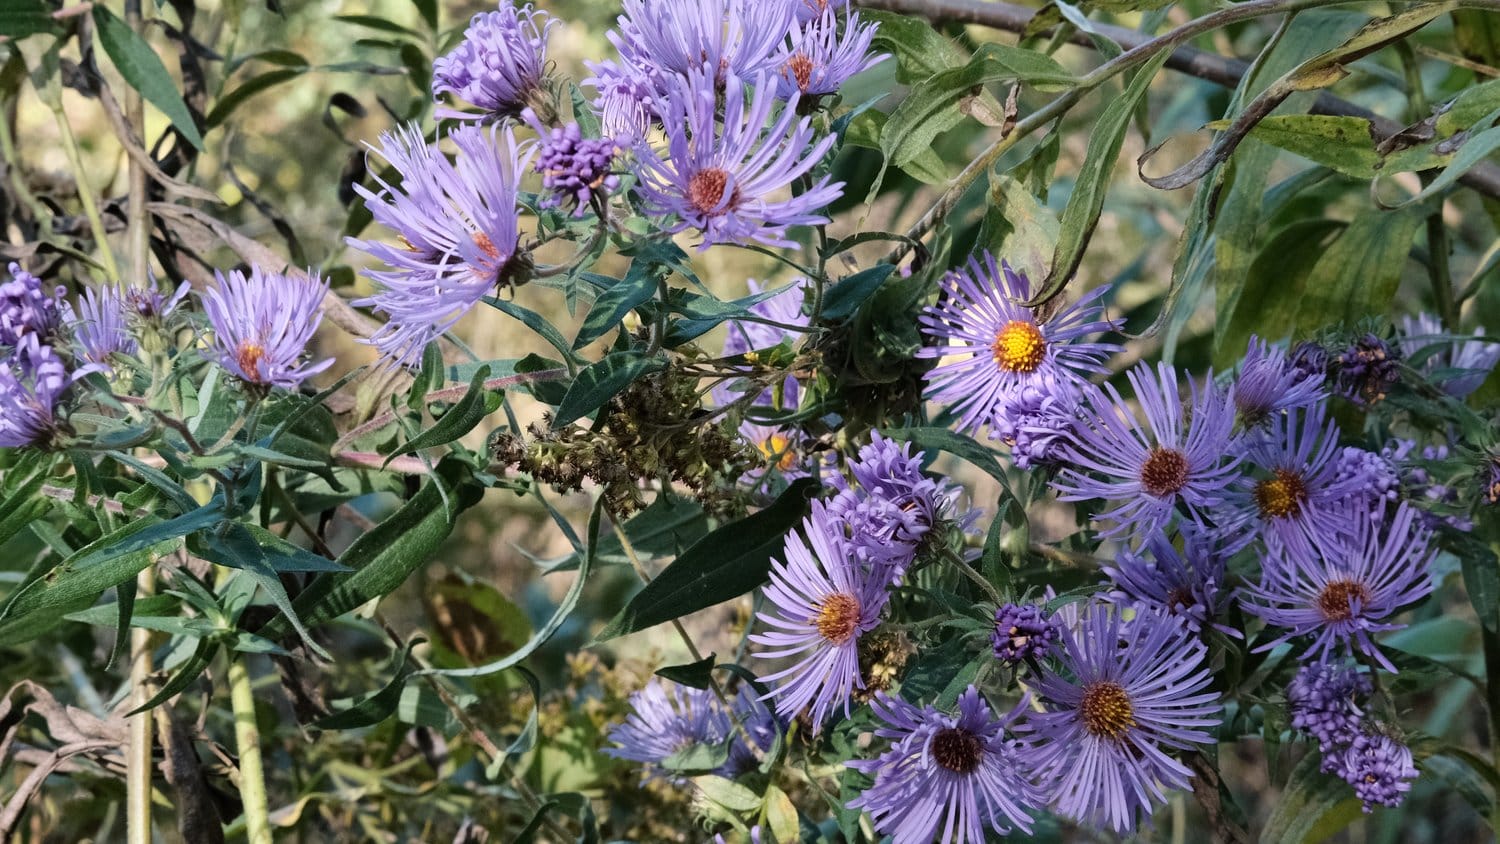 Sunlight on the aromatic aster.